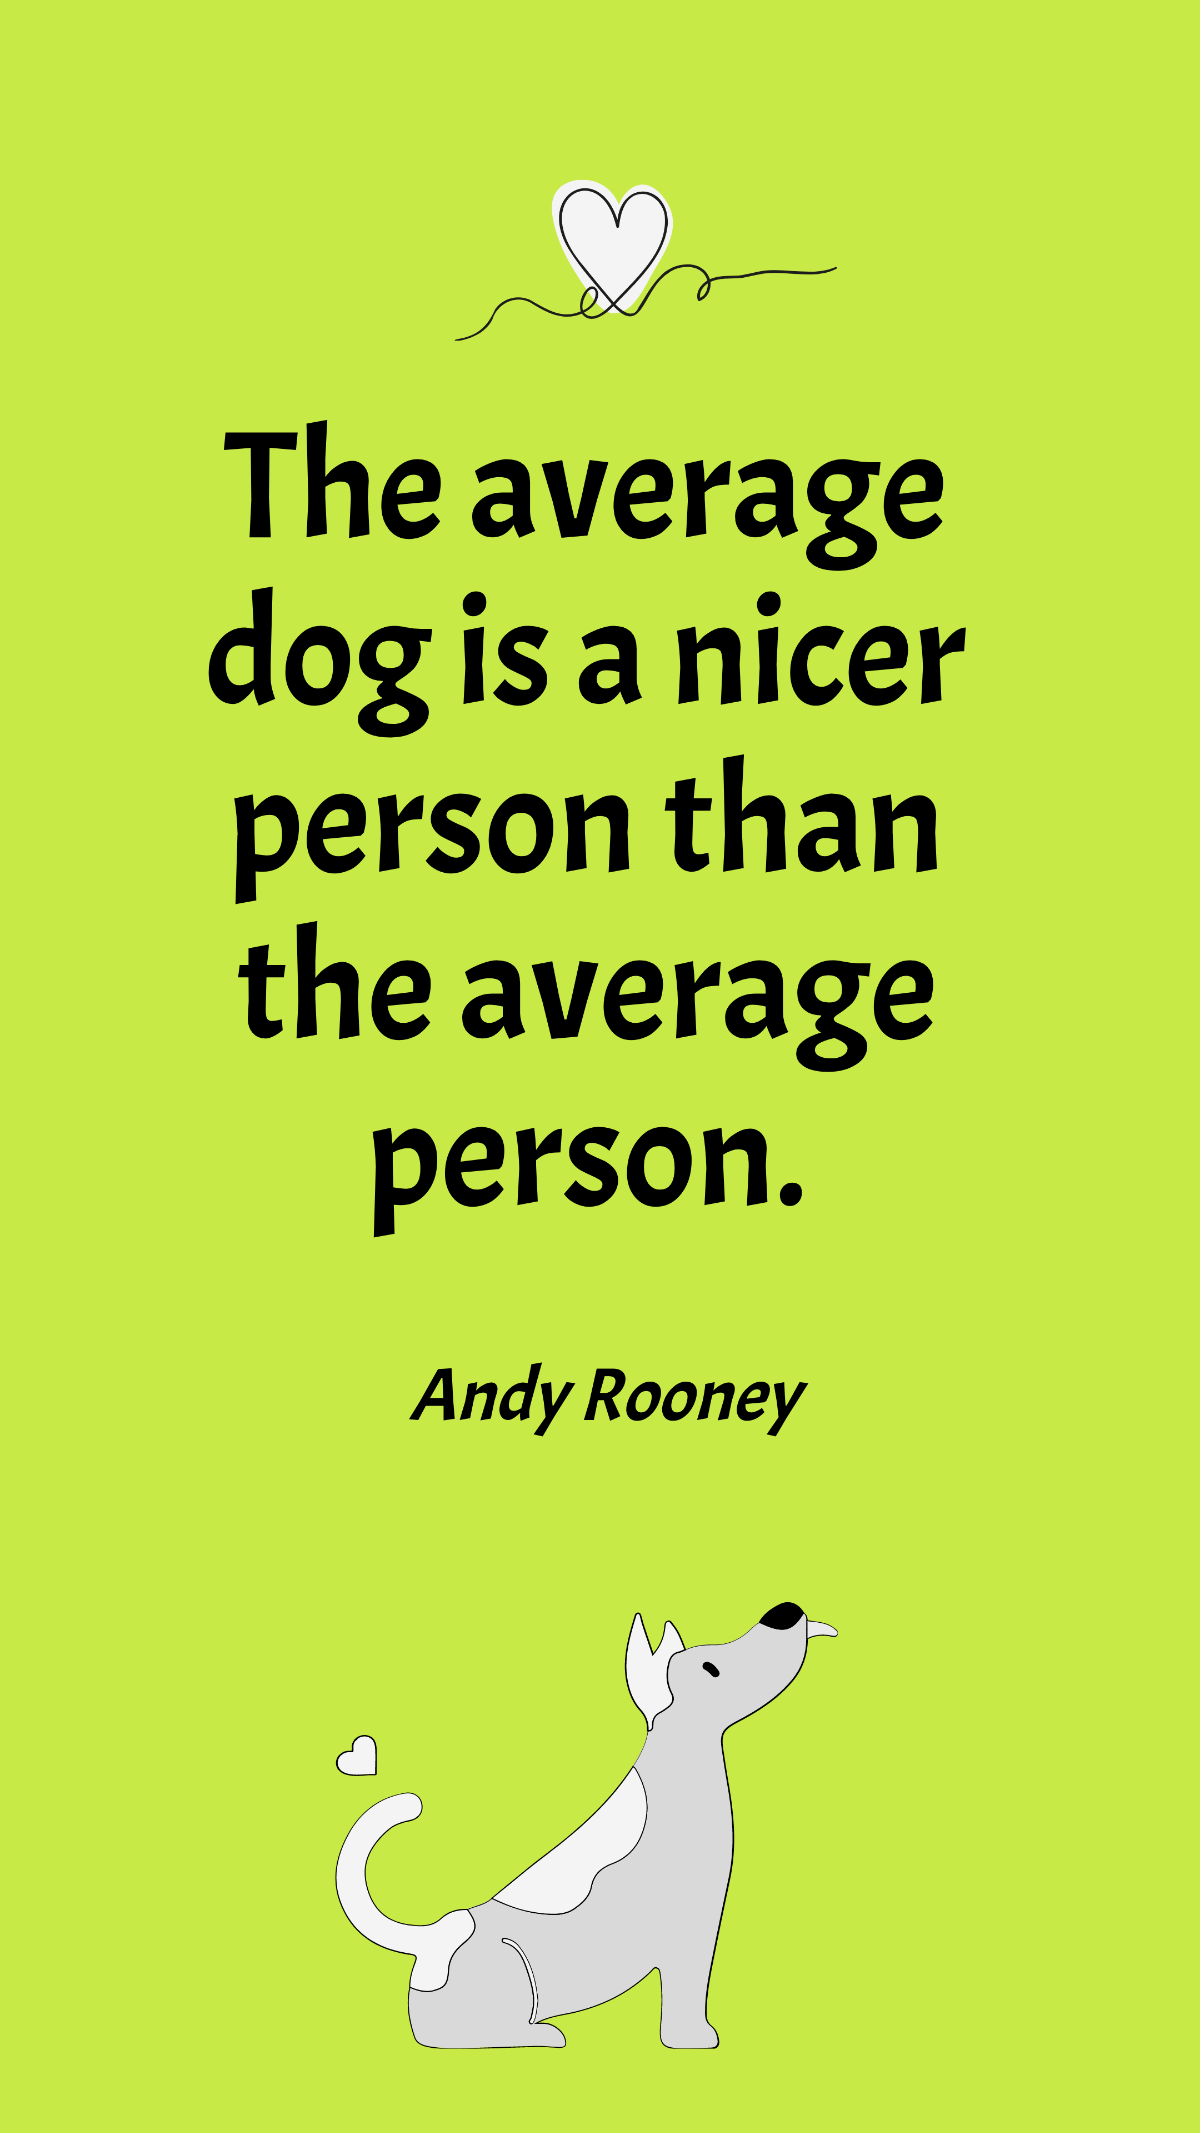 Andy Rooney - The average dog is a nicer person than the average person. Template